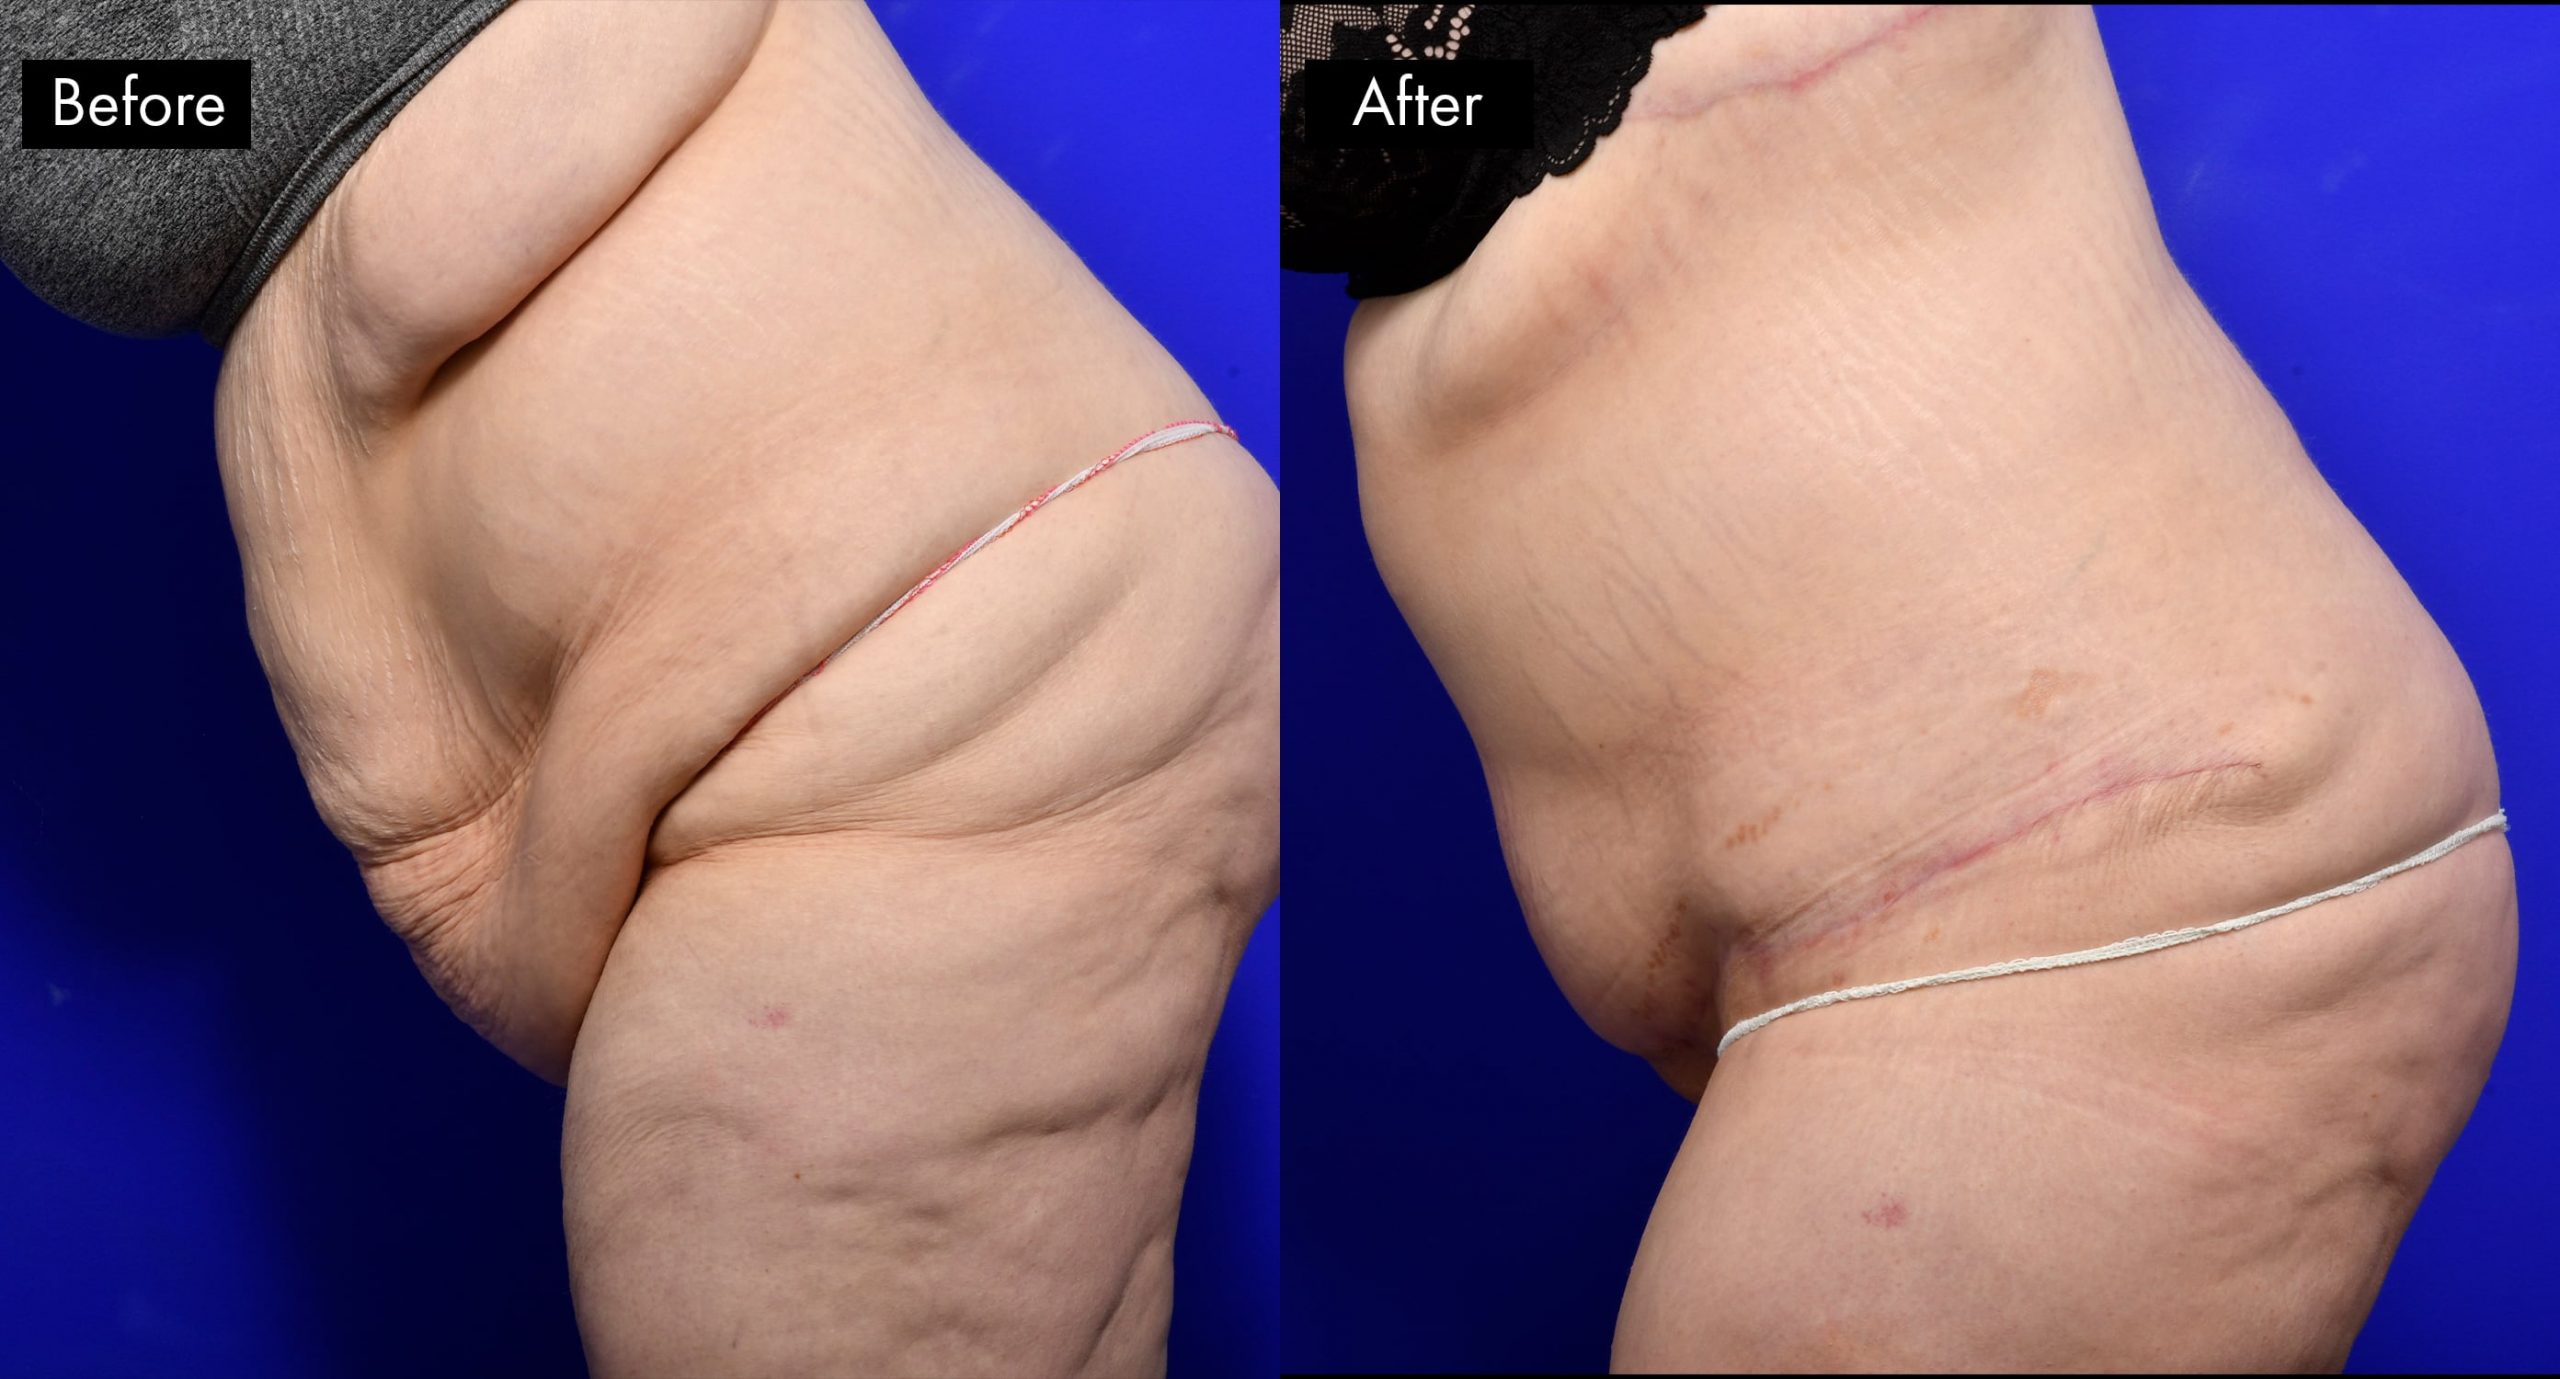 Tummy Tuck (Abdominoplasty) Before and After | 5